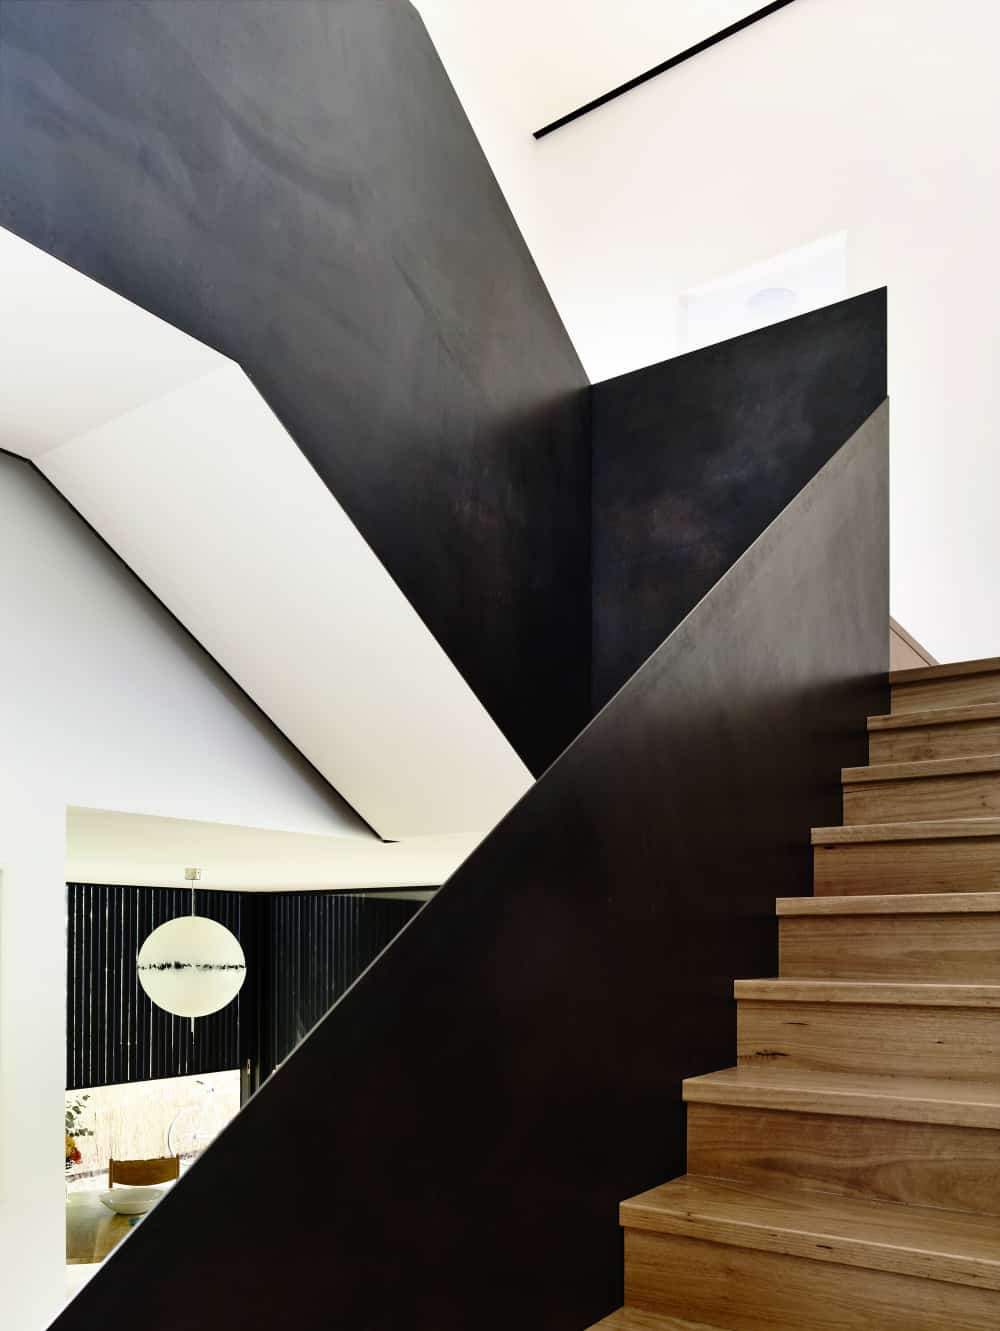 Wooden staircase comes with metal railing